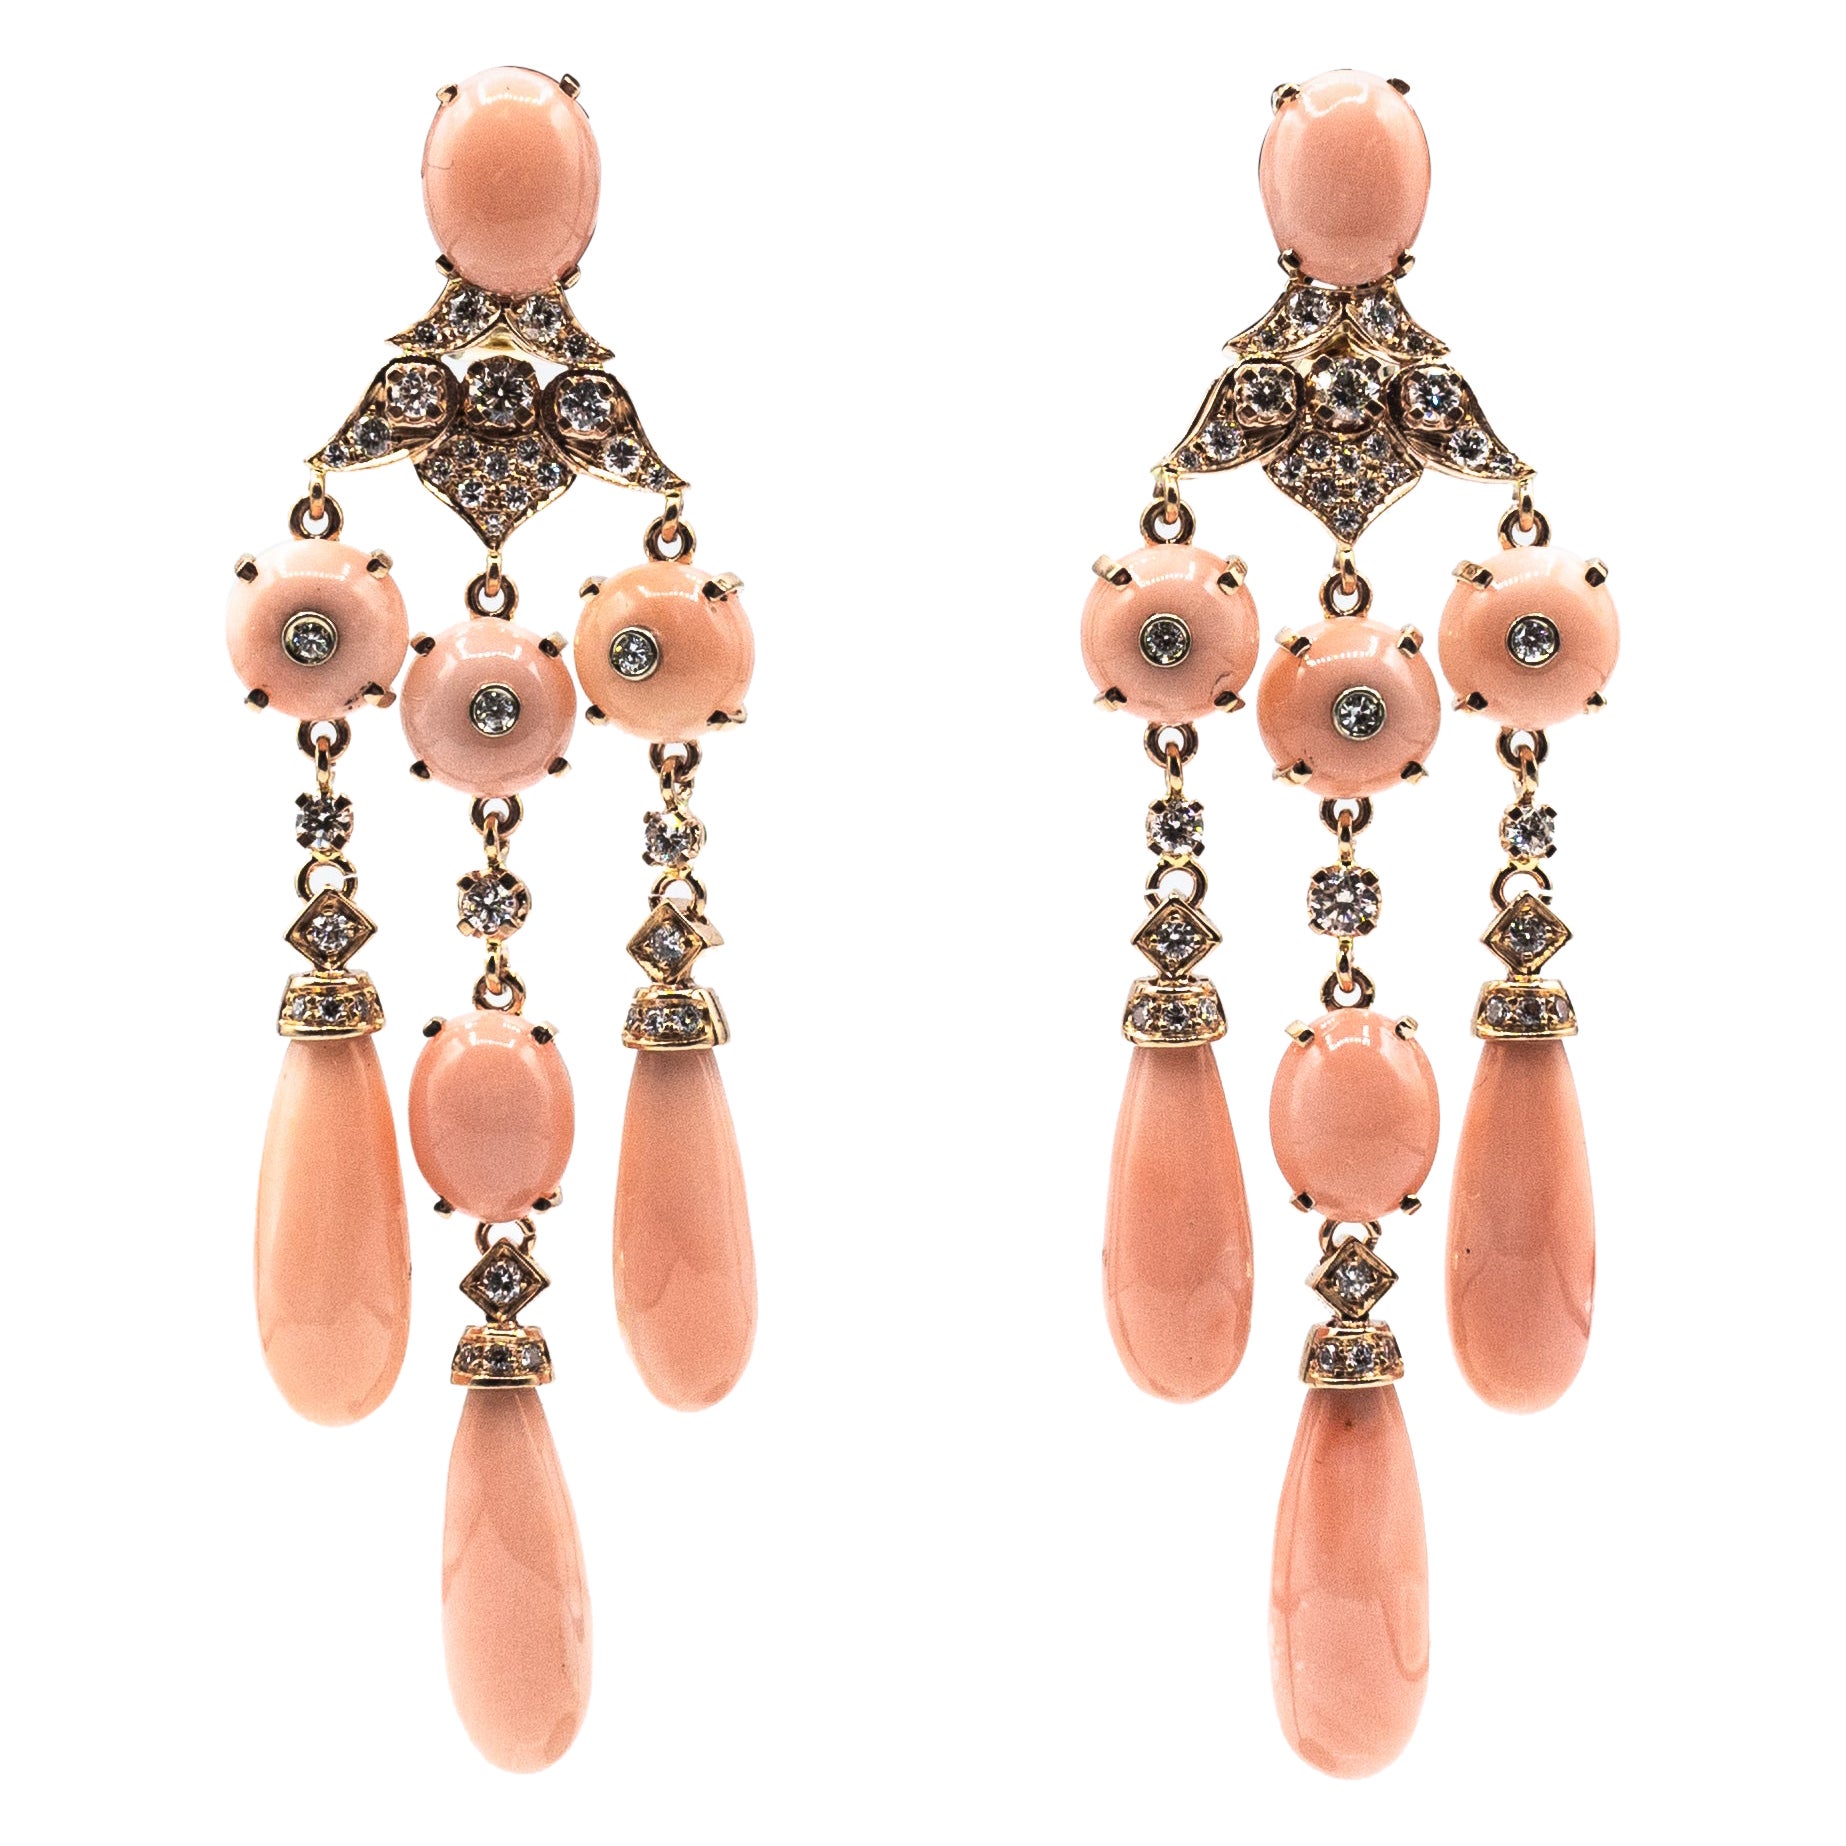 Art Deco Style Handcrafted White Diamond Pink Coral Yellow Gold Clip-On Earrings